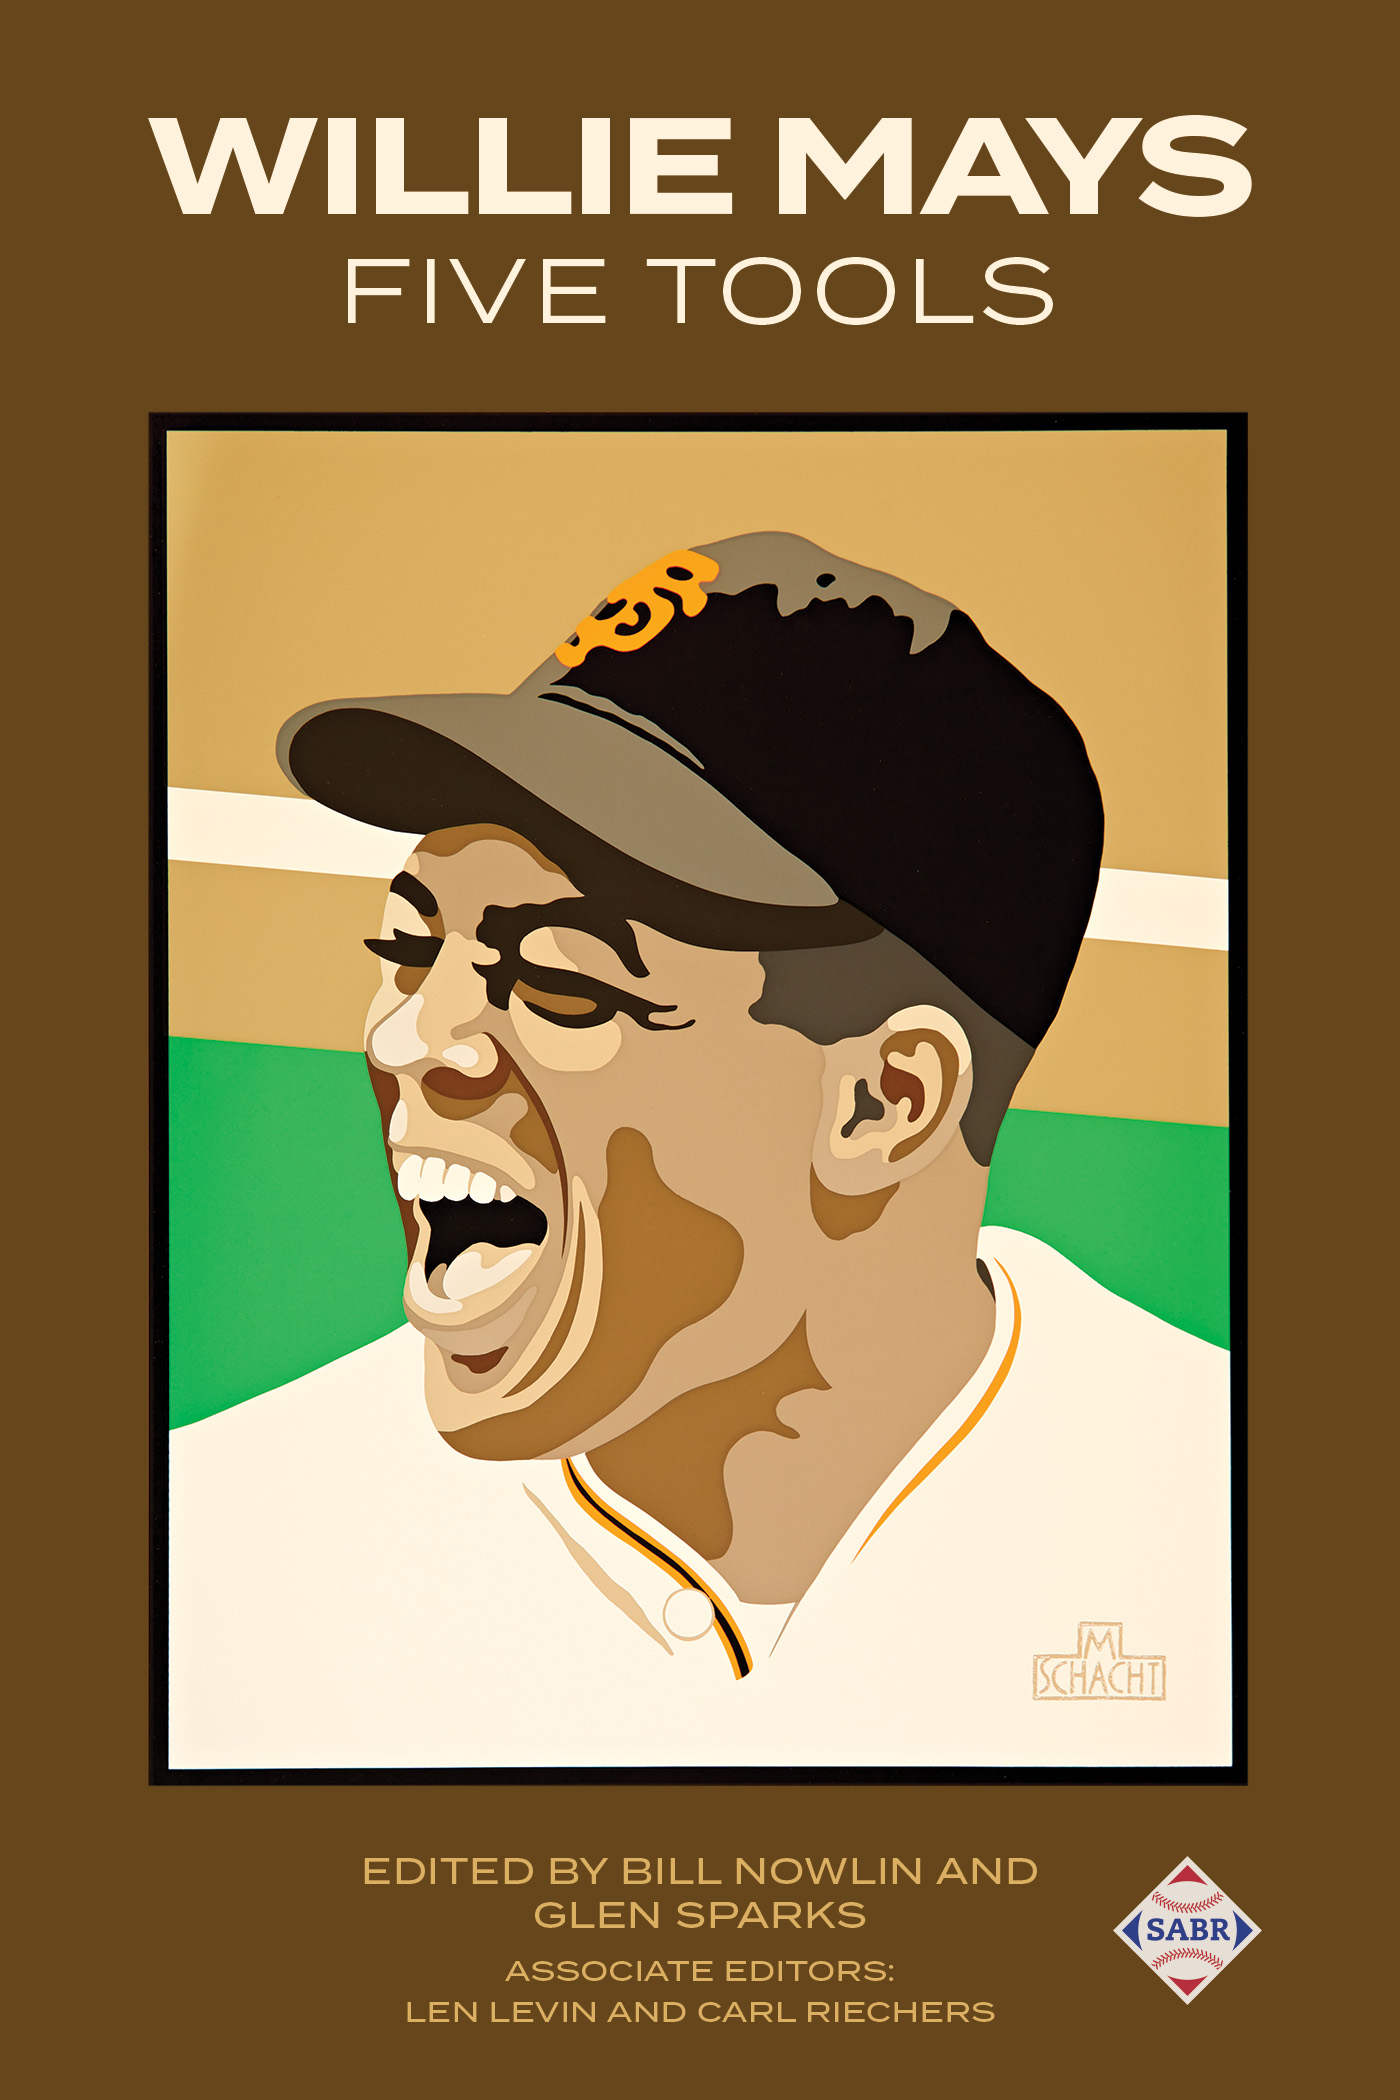 Willie Mays Five Tools, edited by Bill Nowlin and Glen Sparks